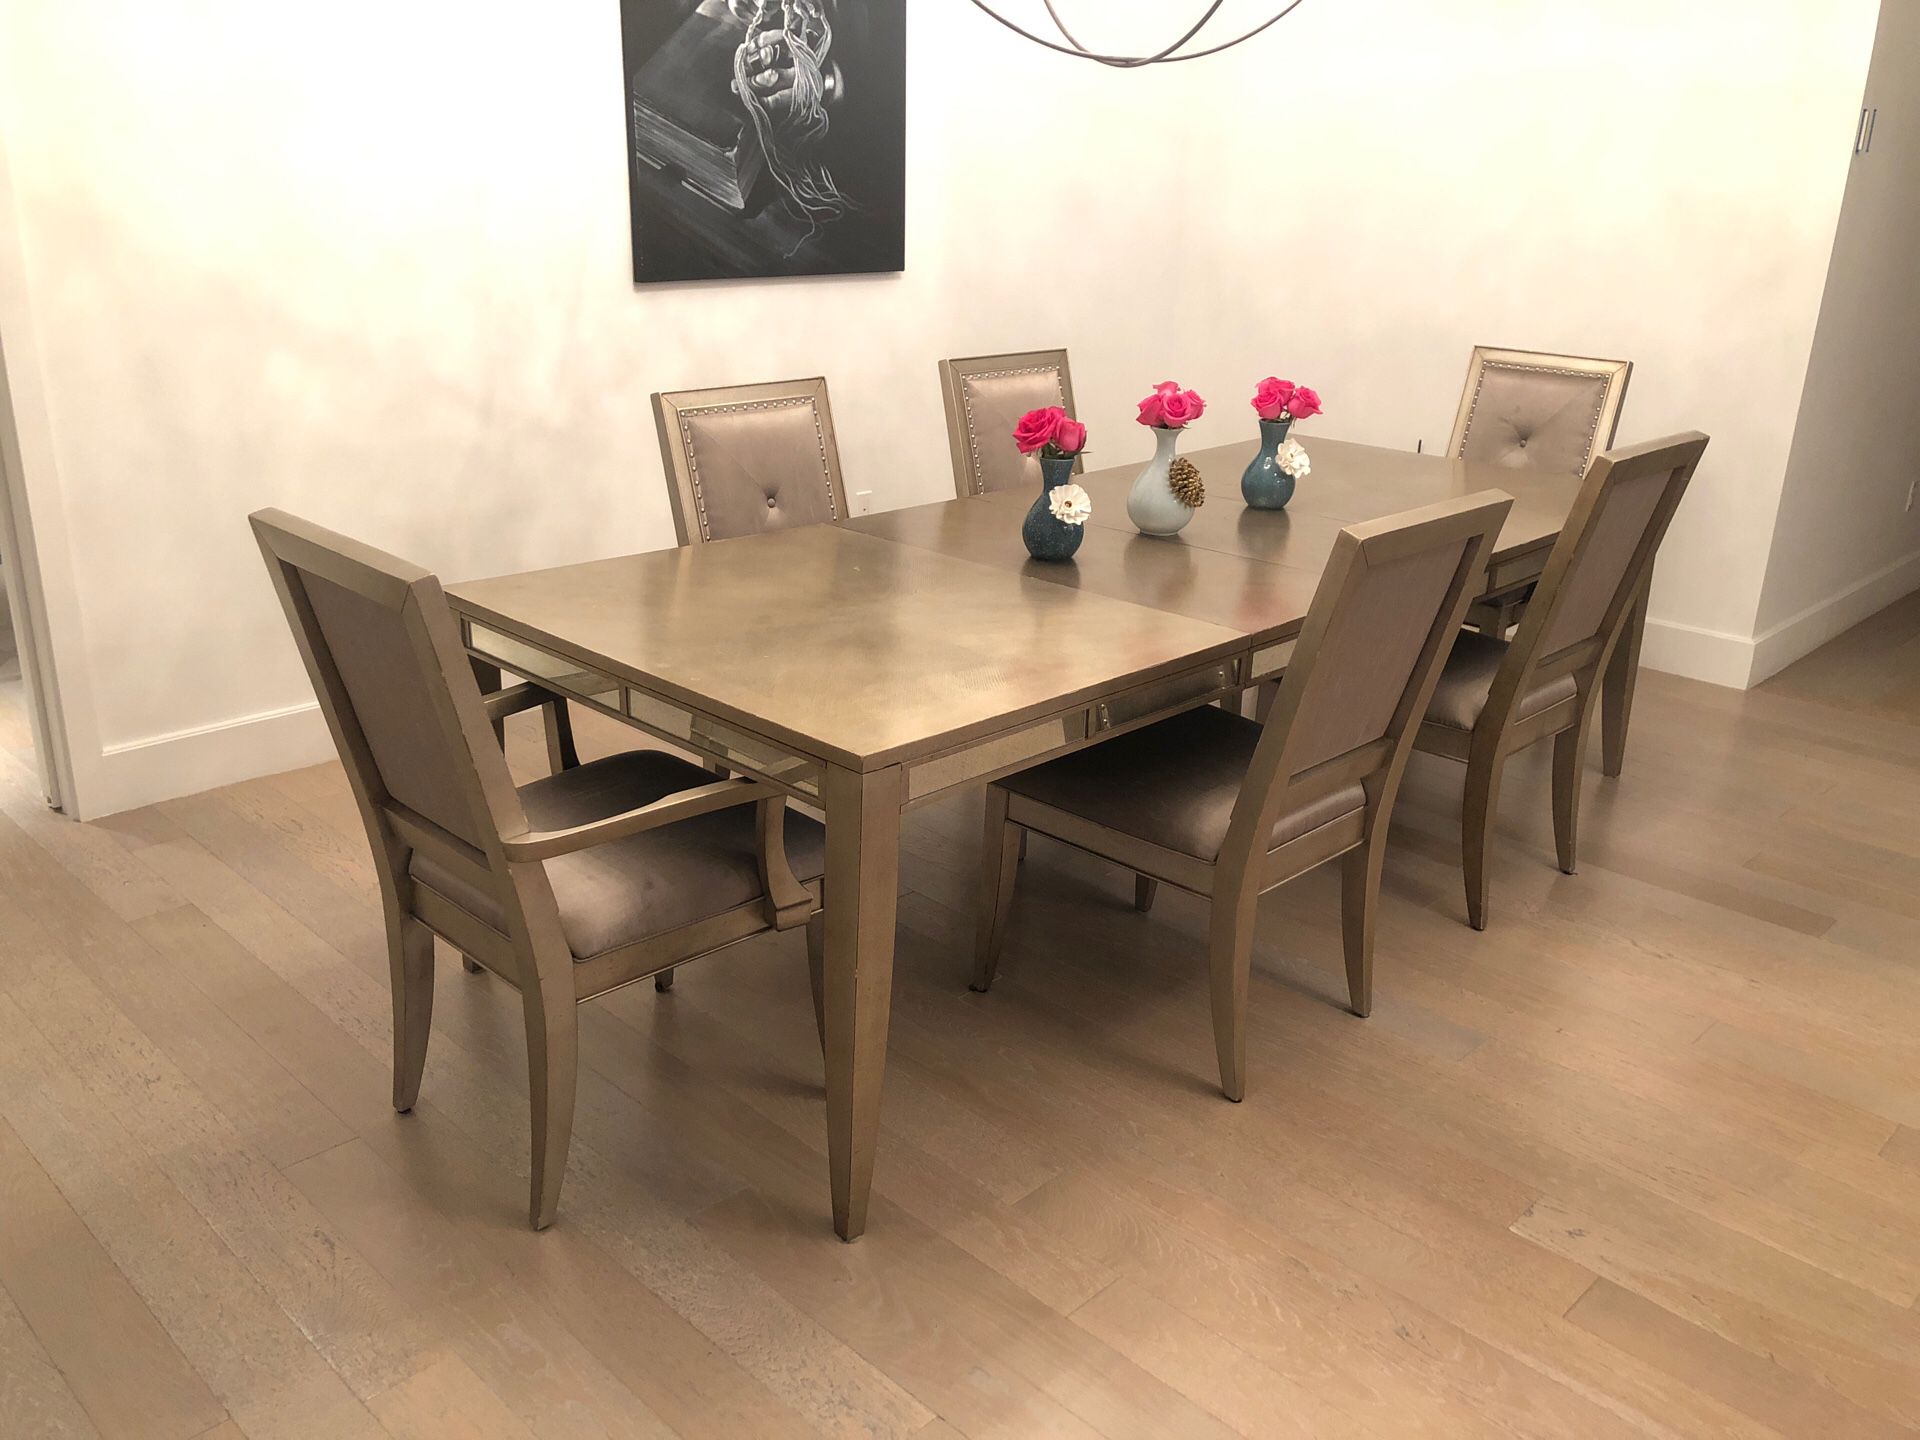 Lot of extensible dining table + 6 chairs